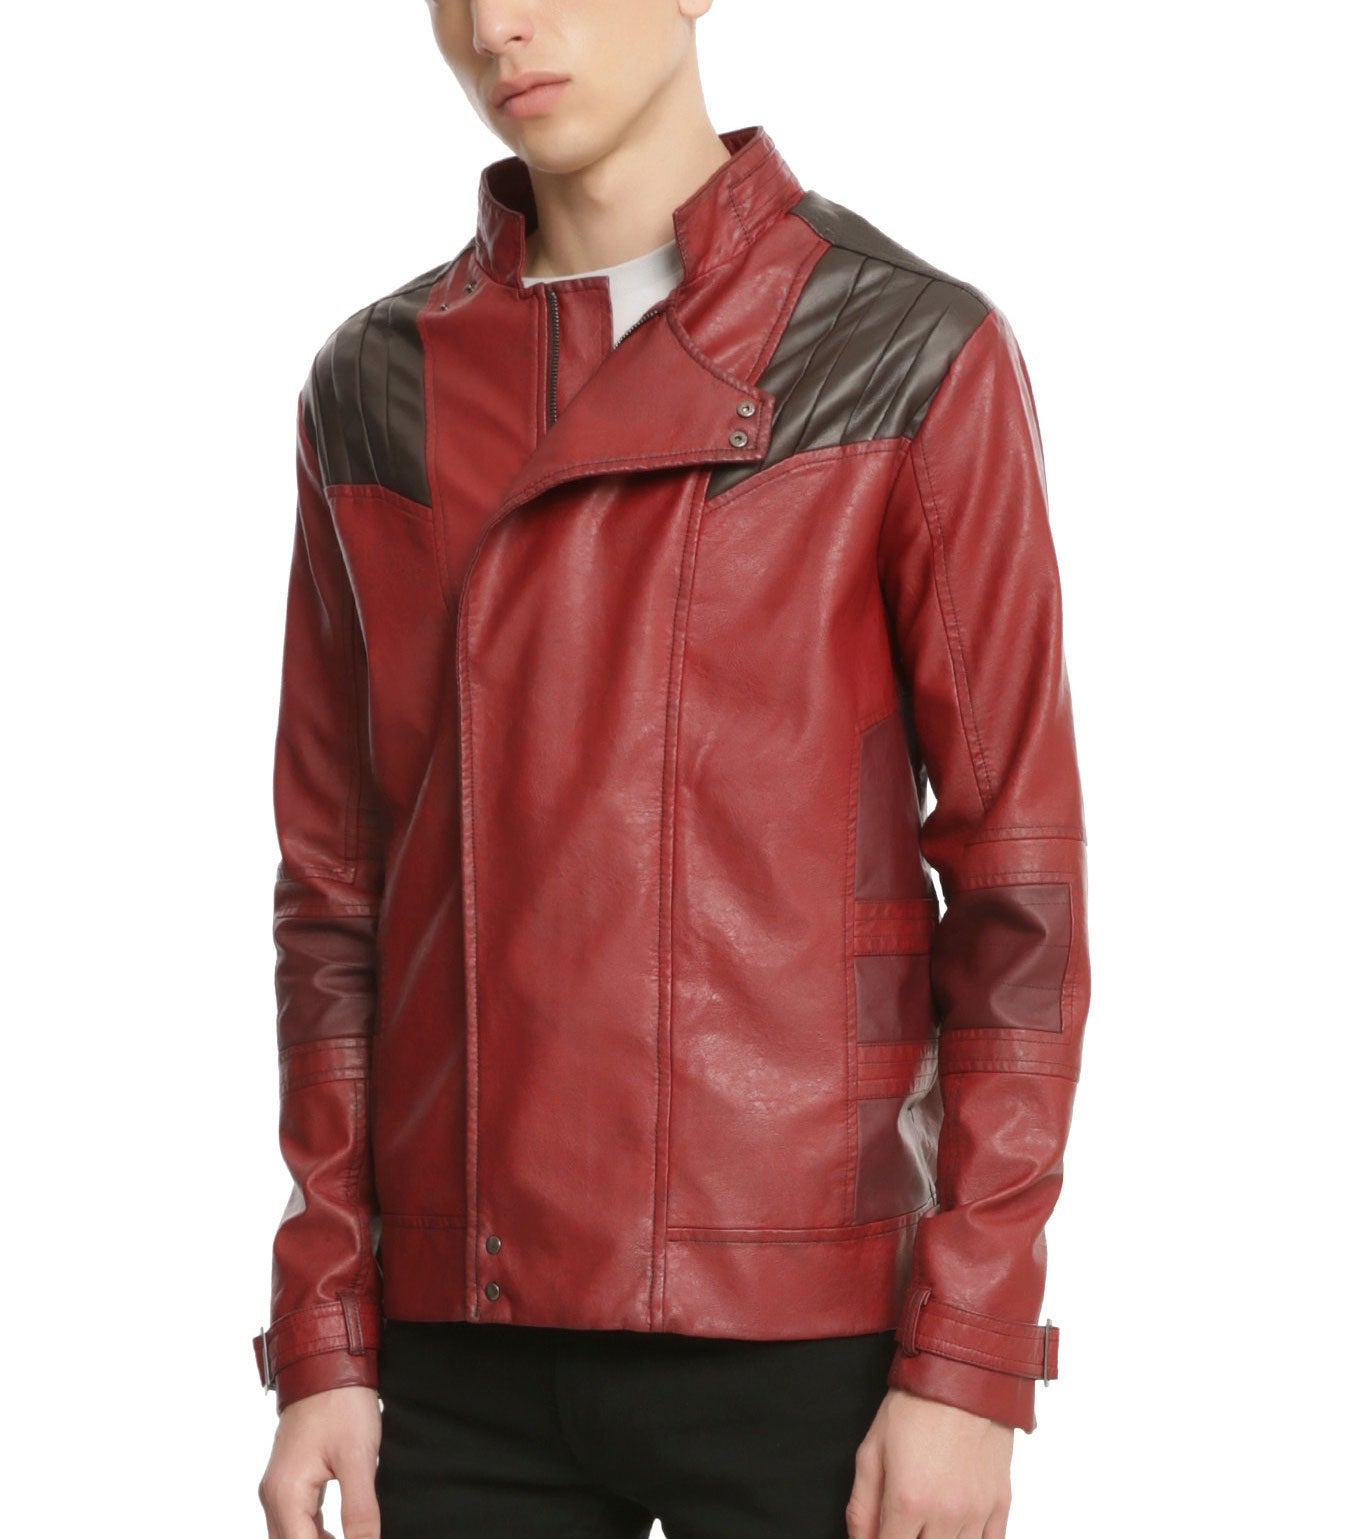 Guardians of The Galaxy Star-Lord Cosplay Jacket